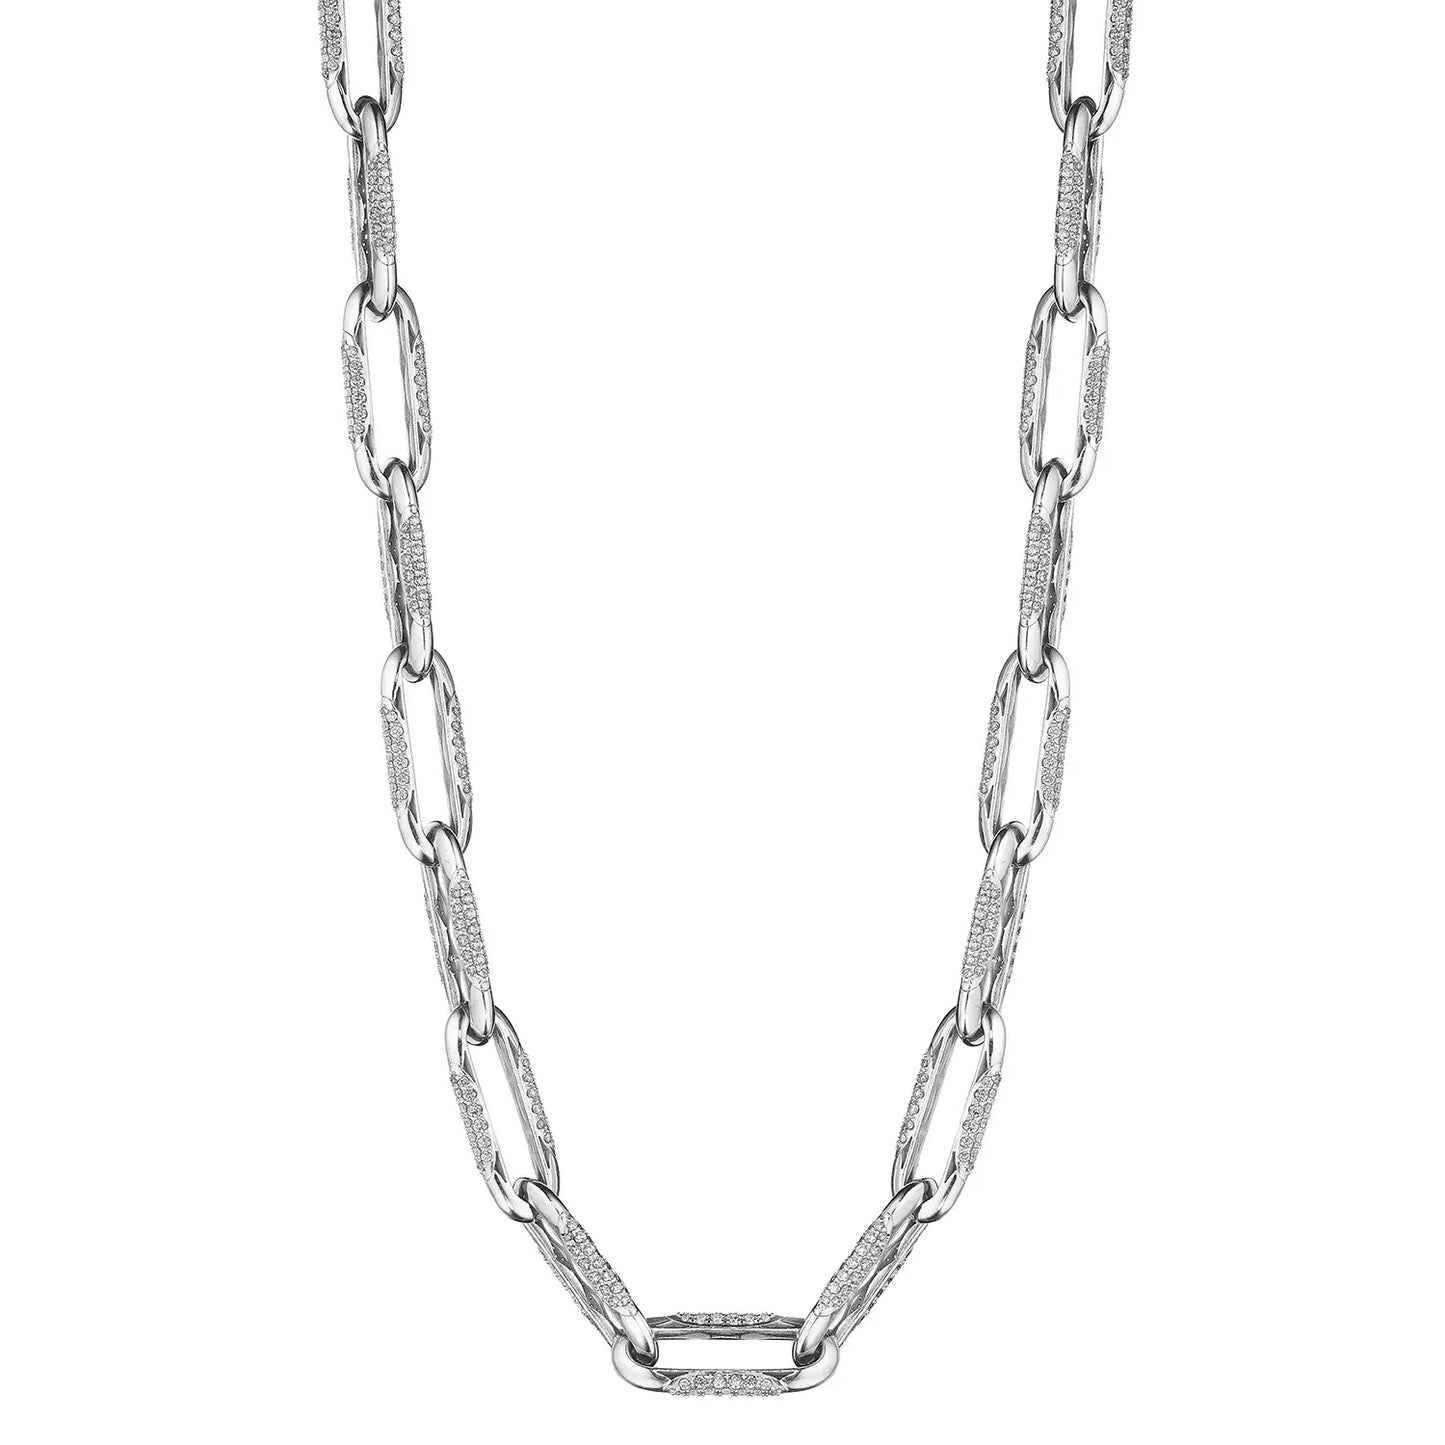 Crescent Eclipse Large Link Necklace. Style FN 666 18.